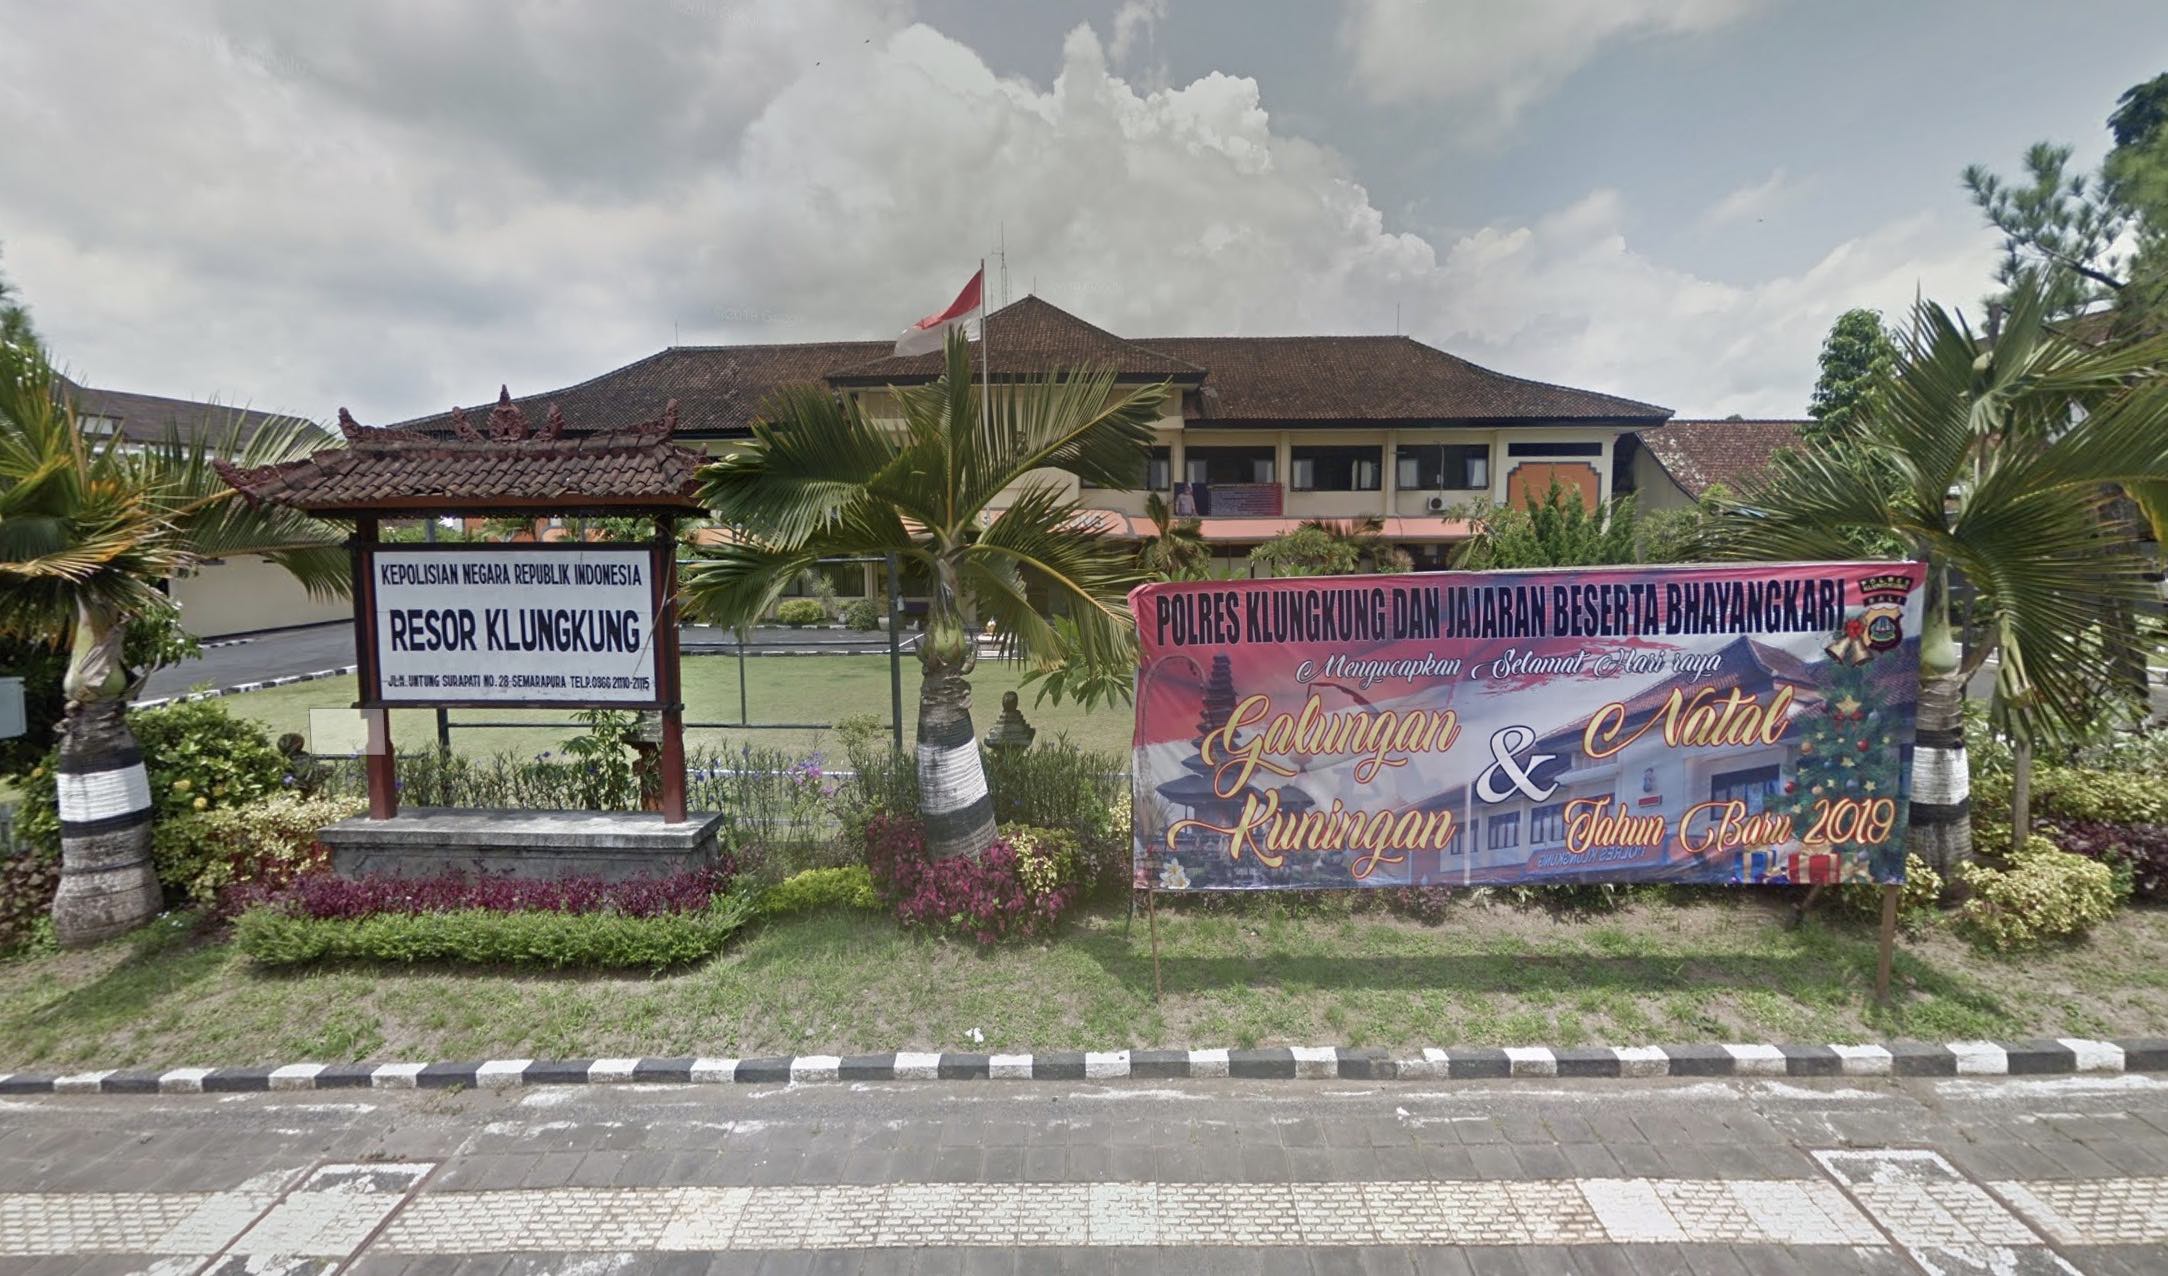 Klungkung Police Station. Photo: Google Maps